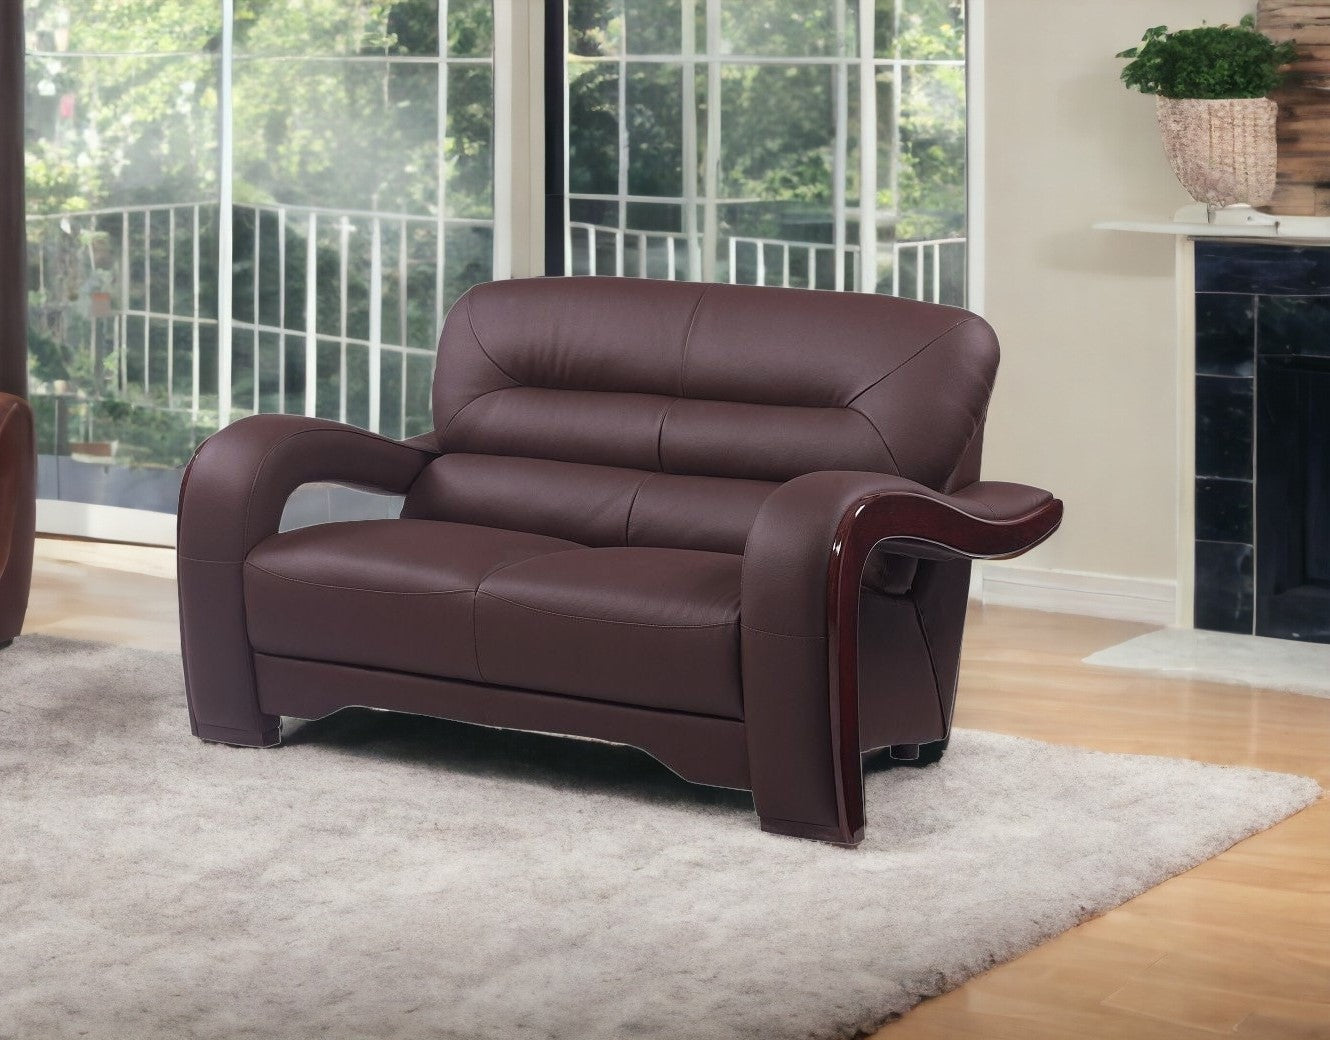 56" Brown And Dark Brown Faux Leather Love Seat